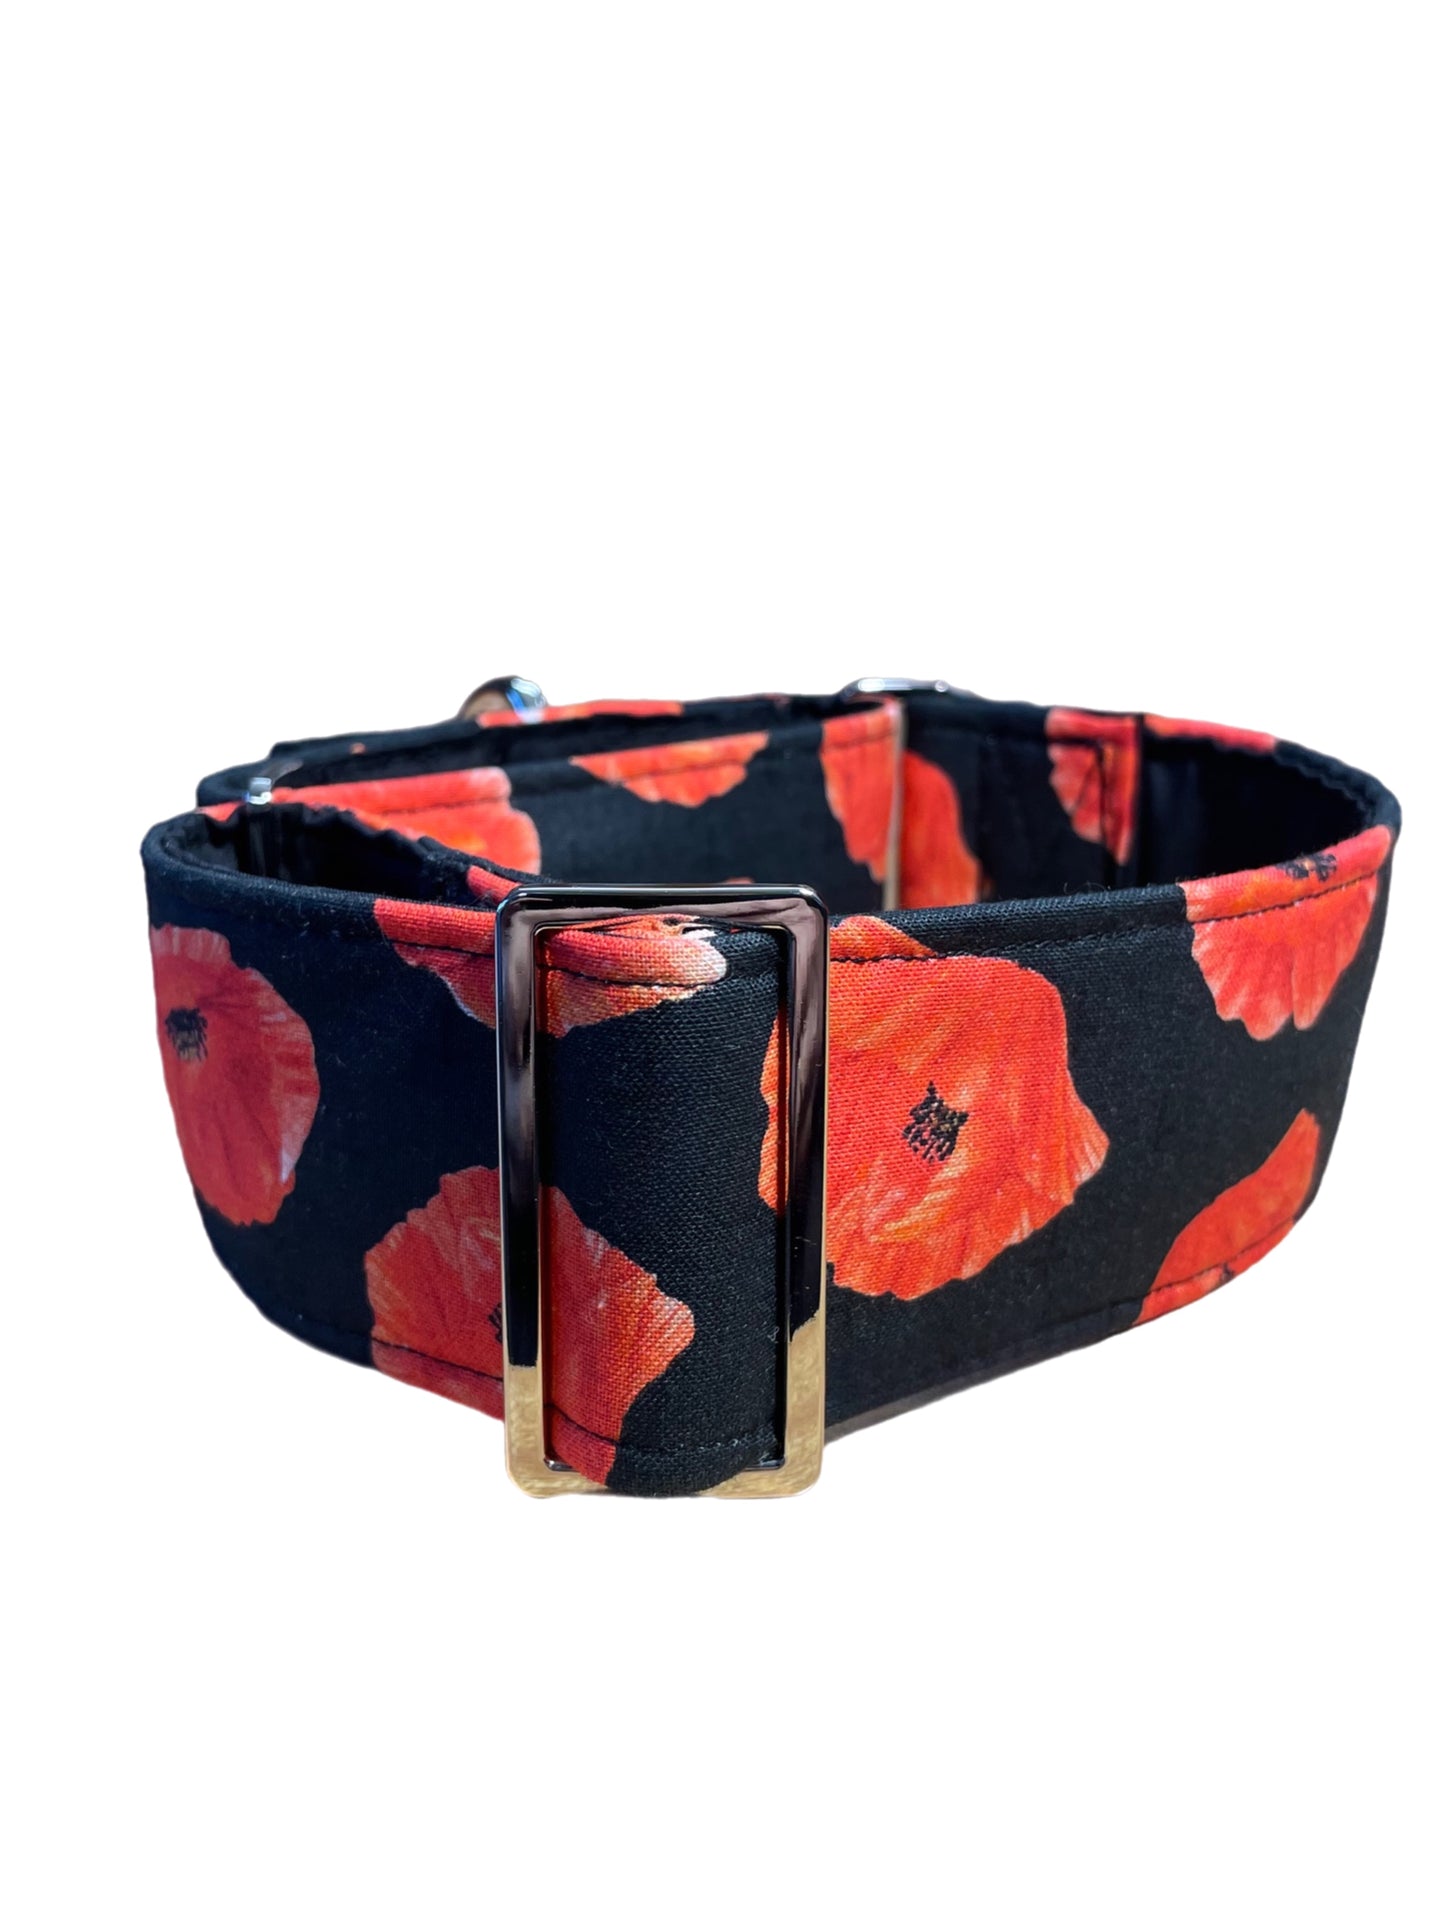 Beautiful poppies black and red greyhound Martingale collar cotton covered 50mm width